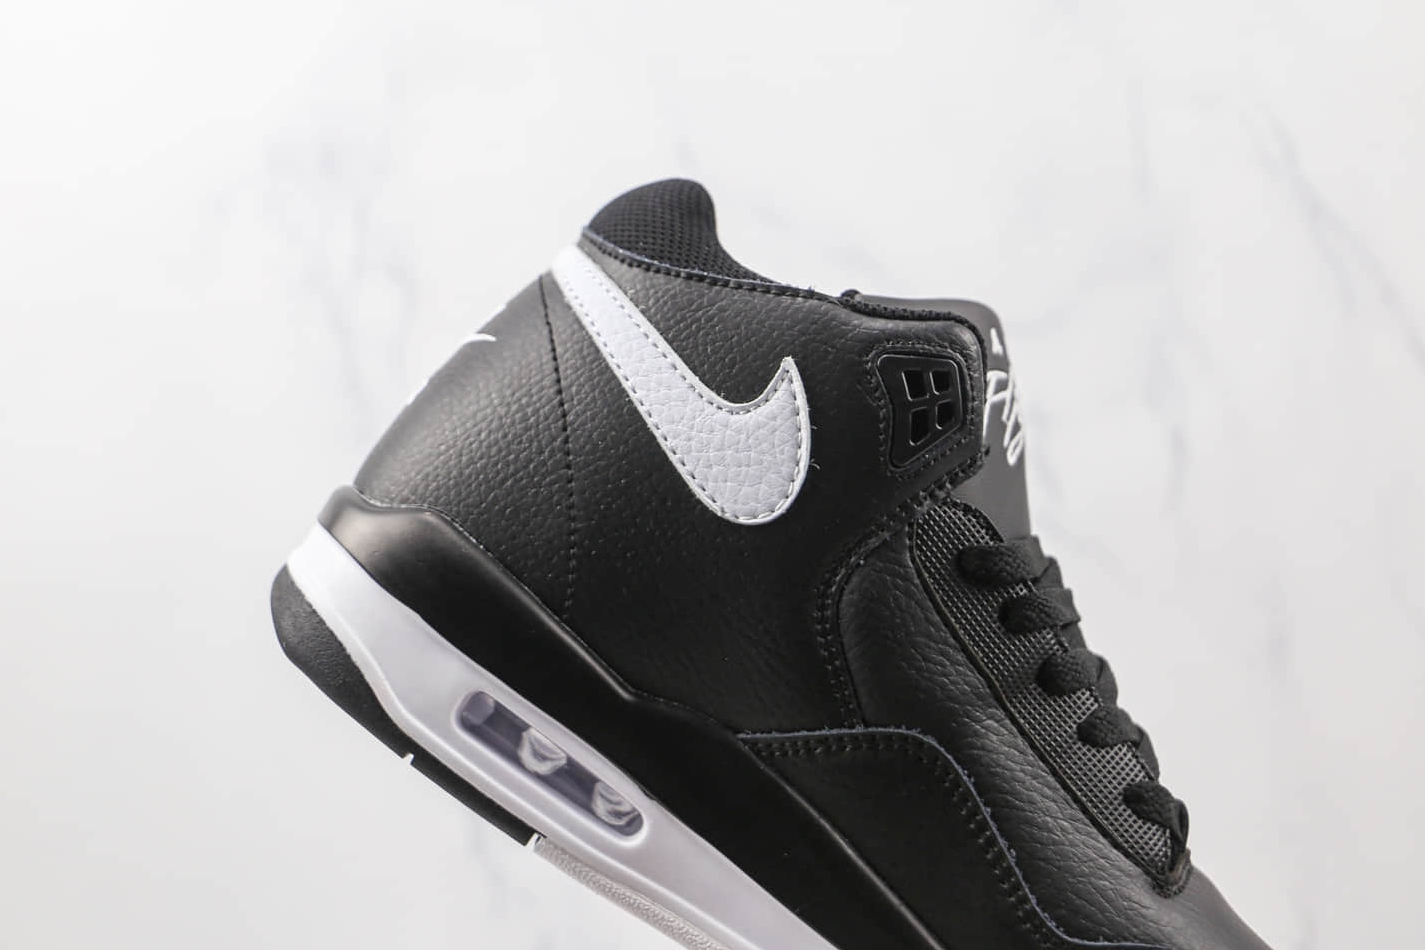 Nike Flight Legacy 'Black White' BQ4212-002 - Stylish and Versatile Footwear for All Occasions